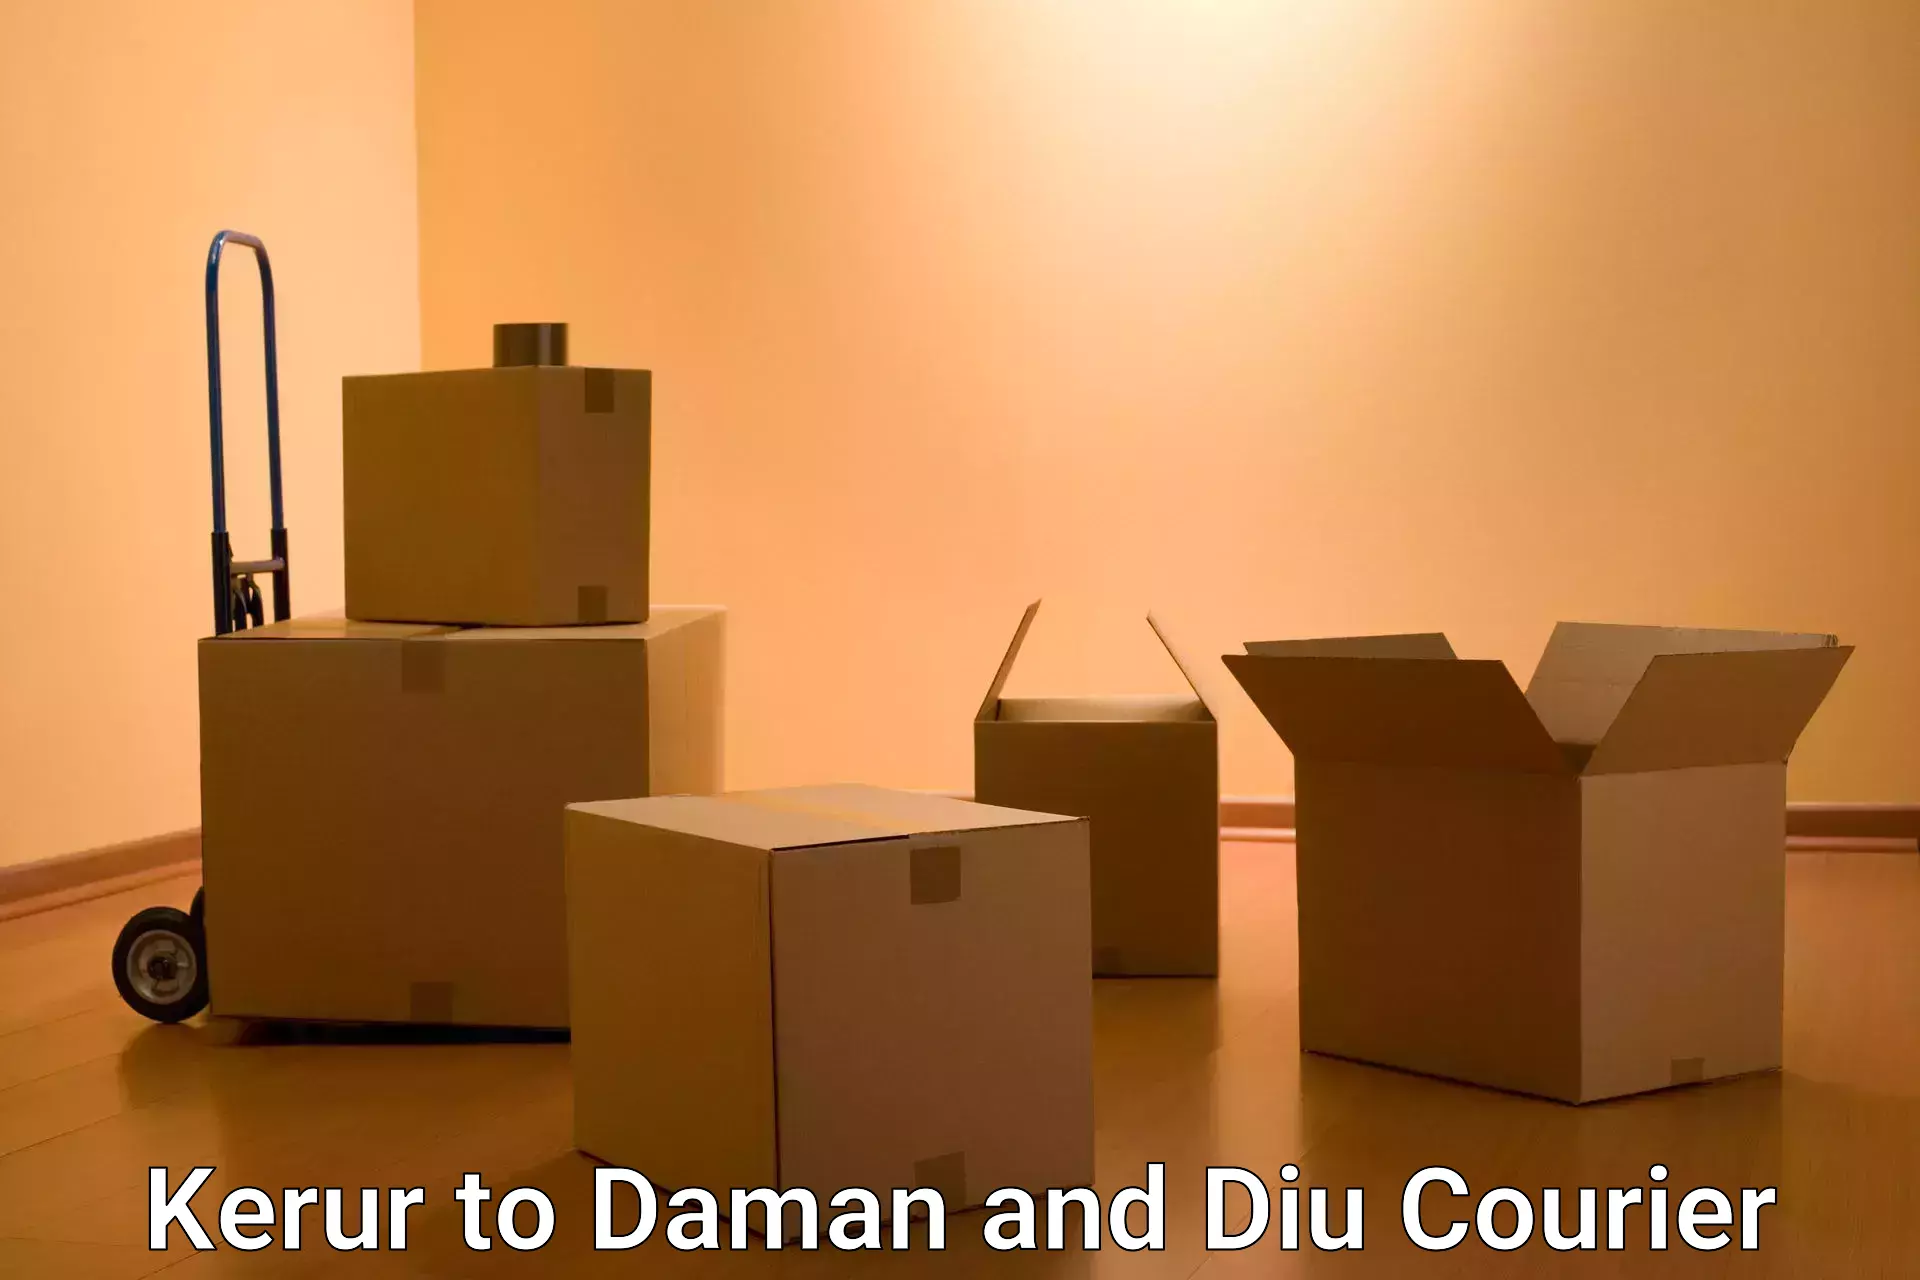 Nationwide parcel services Kerur to Daman and Diu